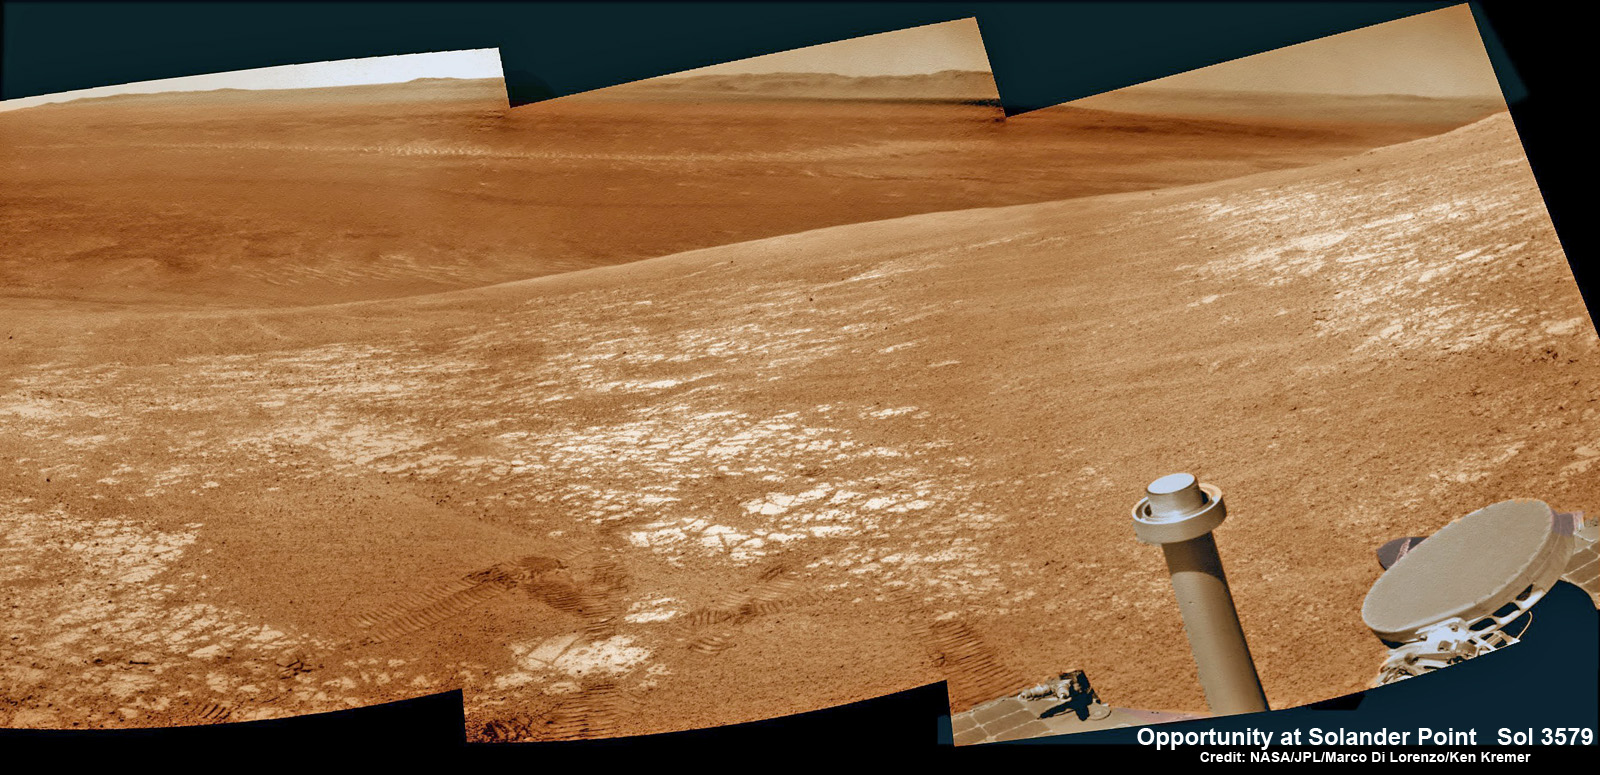 NASA’s Opportunity rover was imaged here from Mars orbit by the MRO HiRISE camera on Feb. 14, 2014. This mosaic shows Opportunity’s view while looking back to vast Endeavour crater from atop Murray Ridge by summit of Solander Point. Opportunity captured this photomosaic view on Feb. 16, 2014 (Sol 3579) from the western rim of Endeavour Crater where she is investigating outcrops of potential clay minerals formed in liquid water. Assembled from Sol 3579 colorized navcam raw images. Credit: NASA/JPL/Cornell/Marco Di Lorenzo/Ken Kremer-kenkremer.com